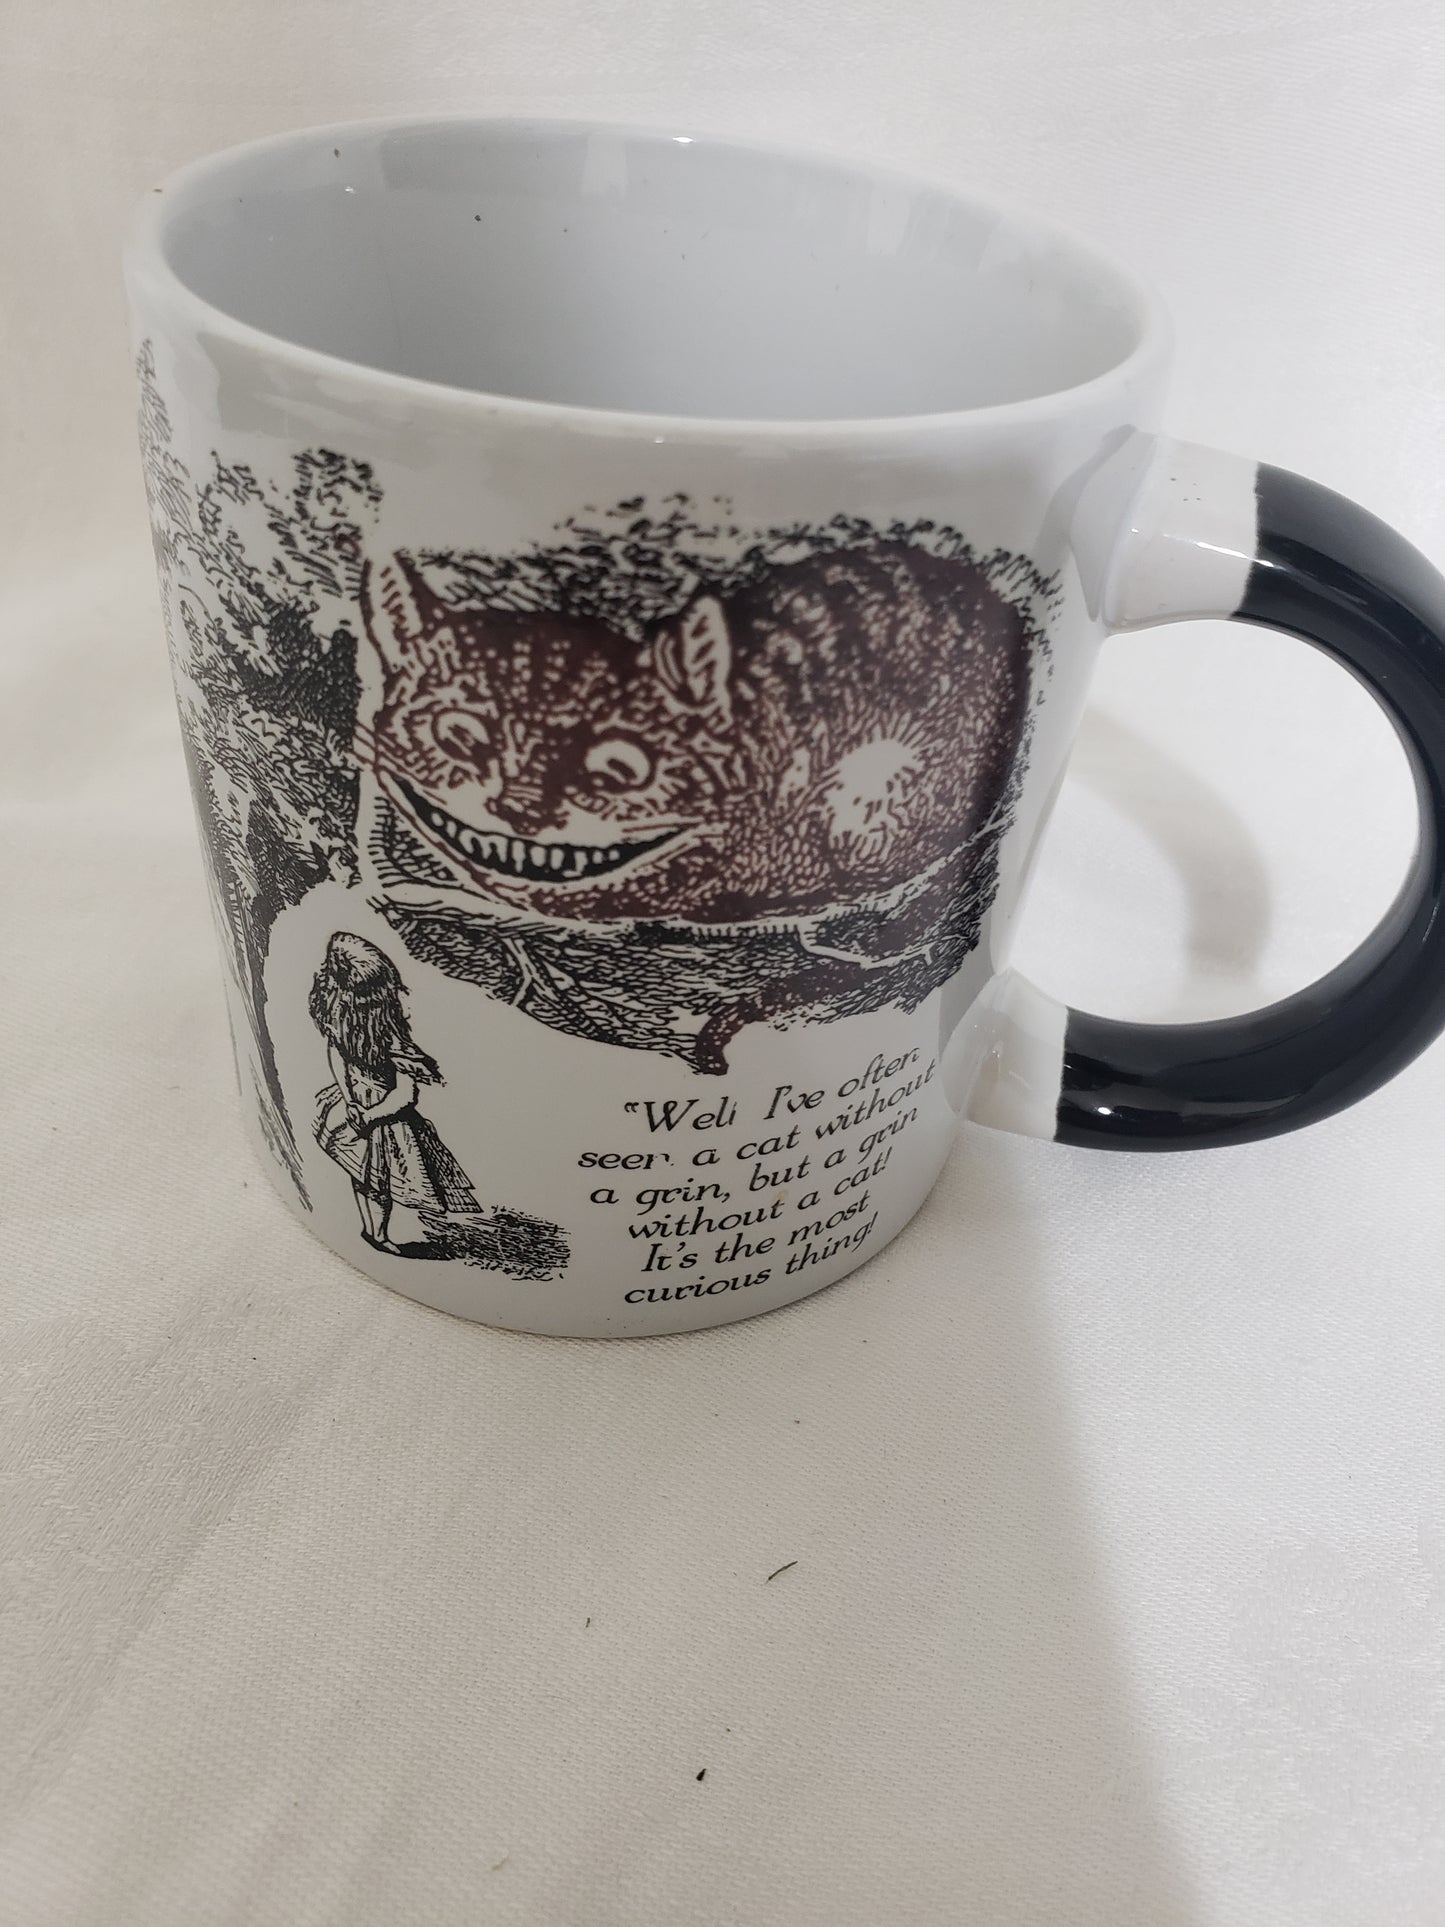 Mug - Cheshire Cat mug - "Well I've often seen a cat without a grin. It's the most curious cat."